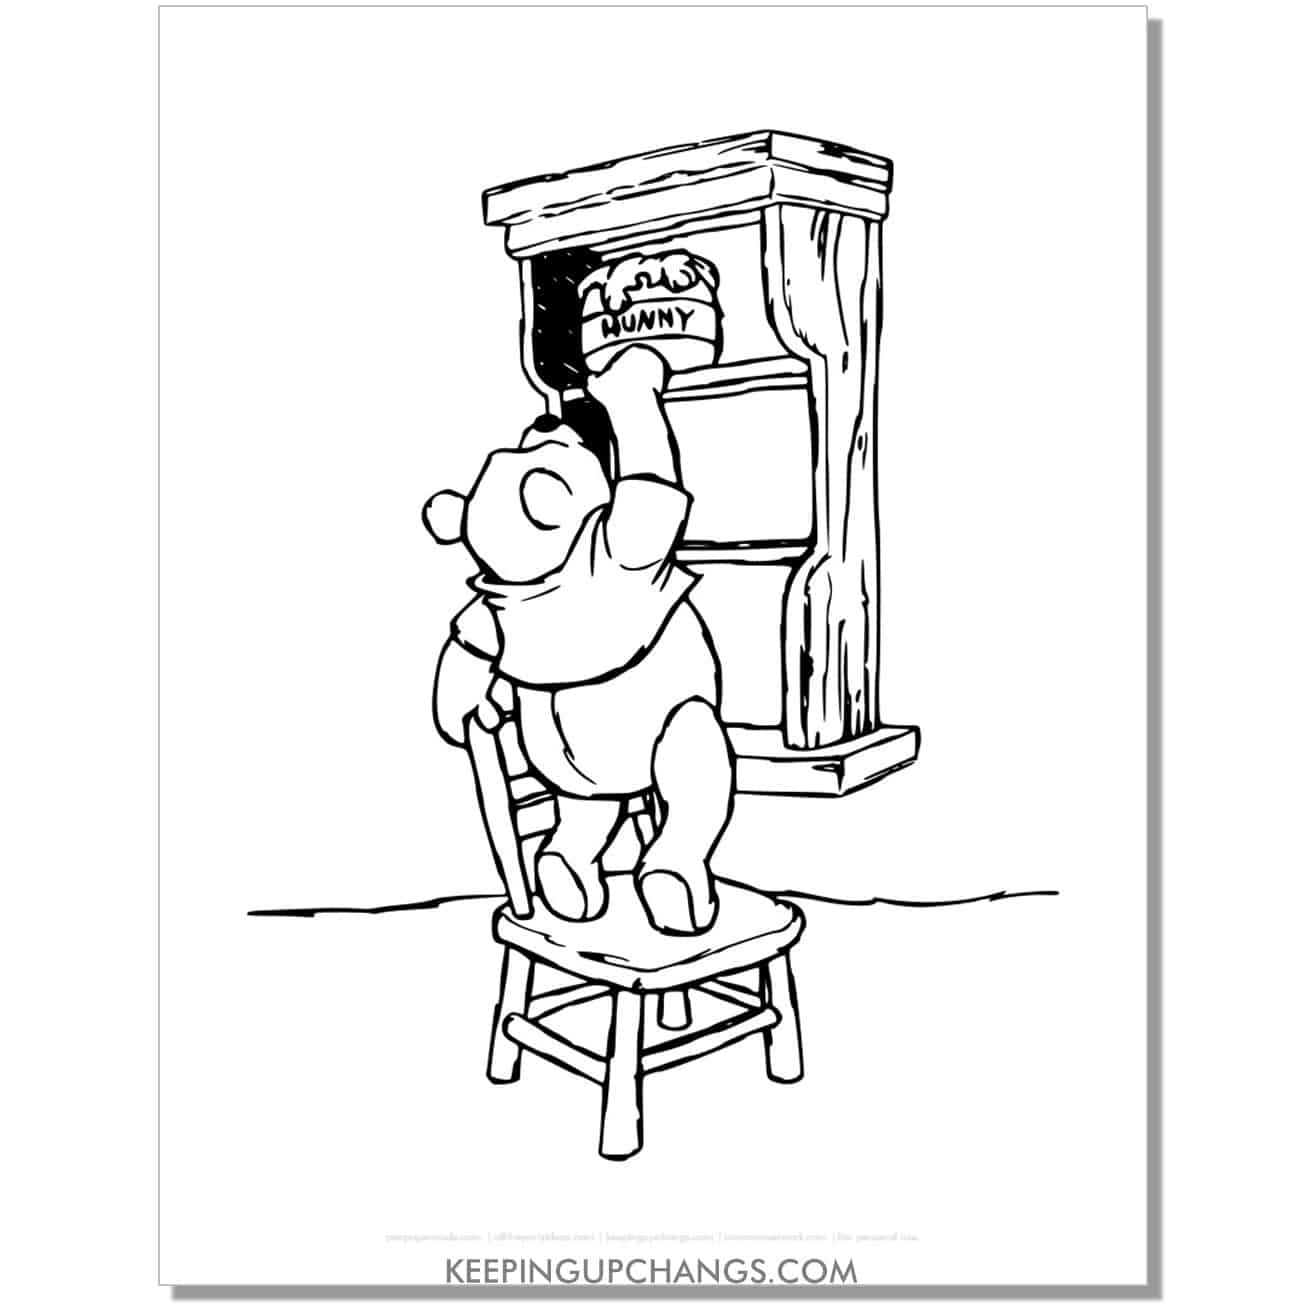 winnie the pooh stands on chair to reach honey pot on shelf coloring page, sheet.